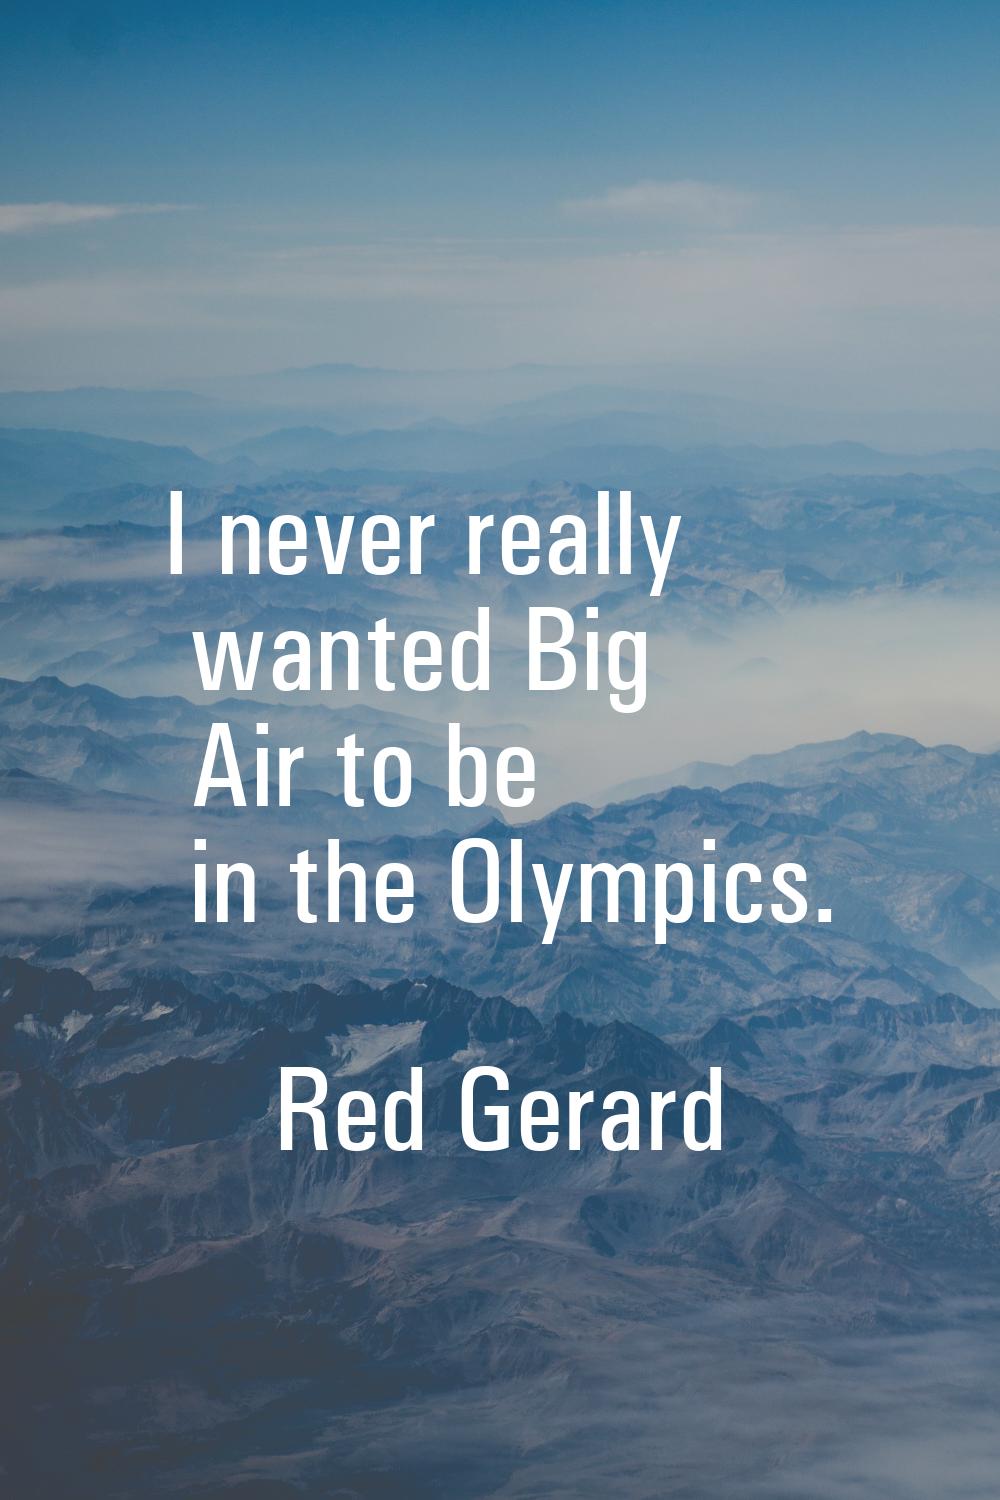 I never really wanted Big Air to be in the Olympics.